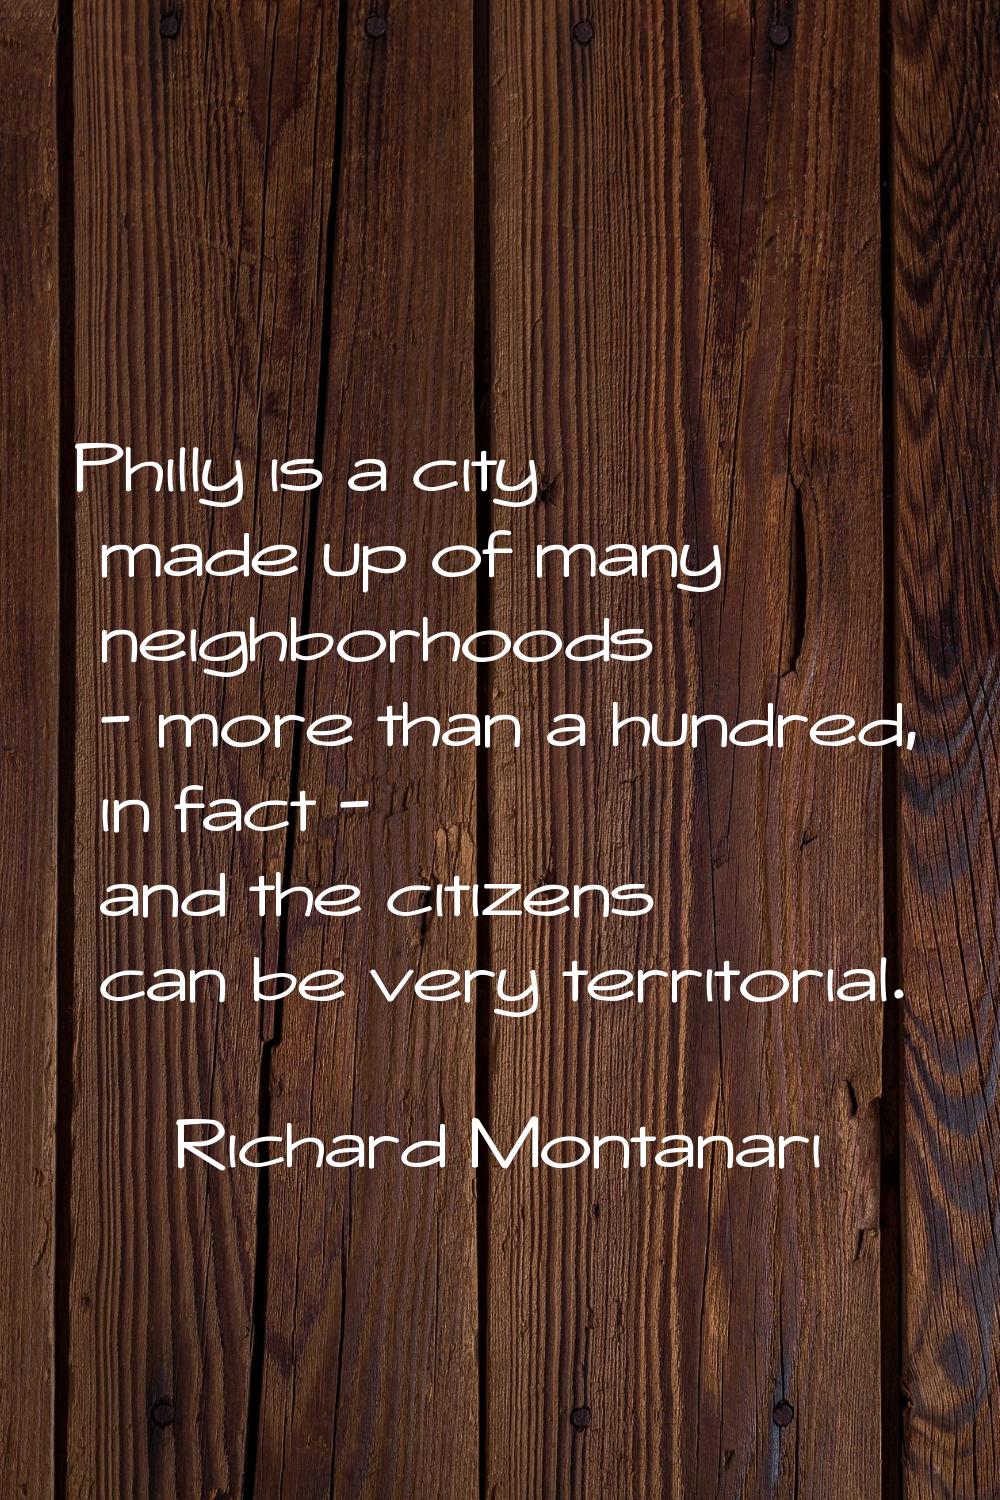 Philly is a city made up of many neighborhoods - more than a hundred, in fact - and the citizens ca